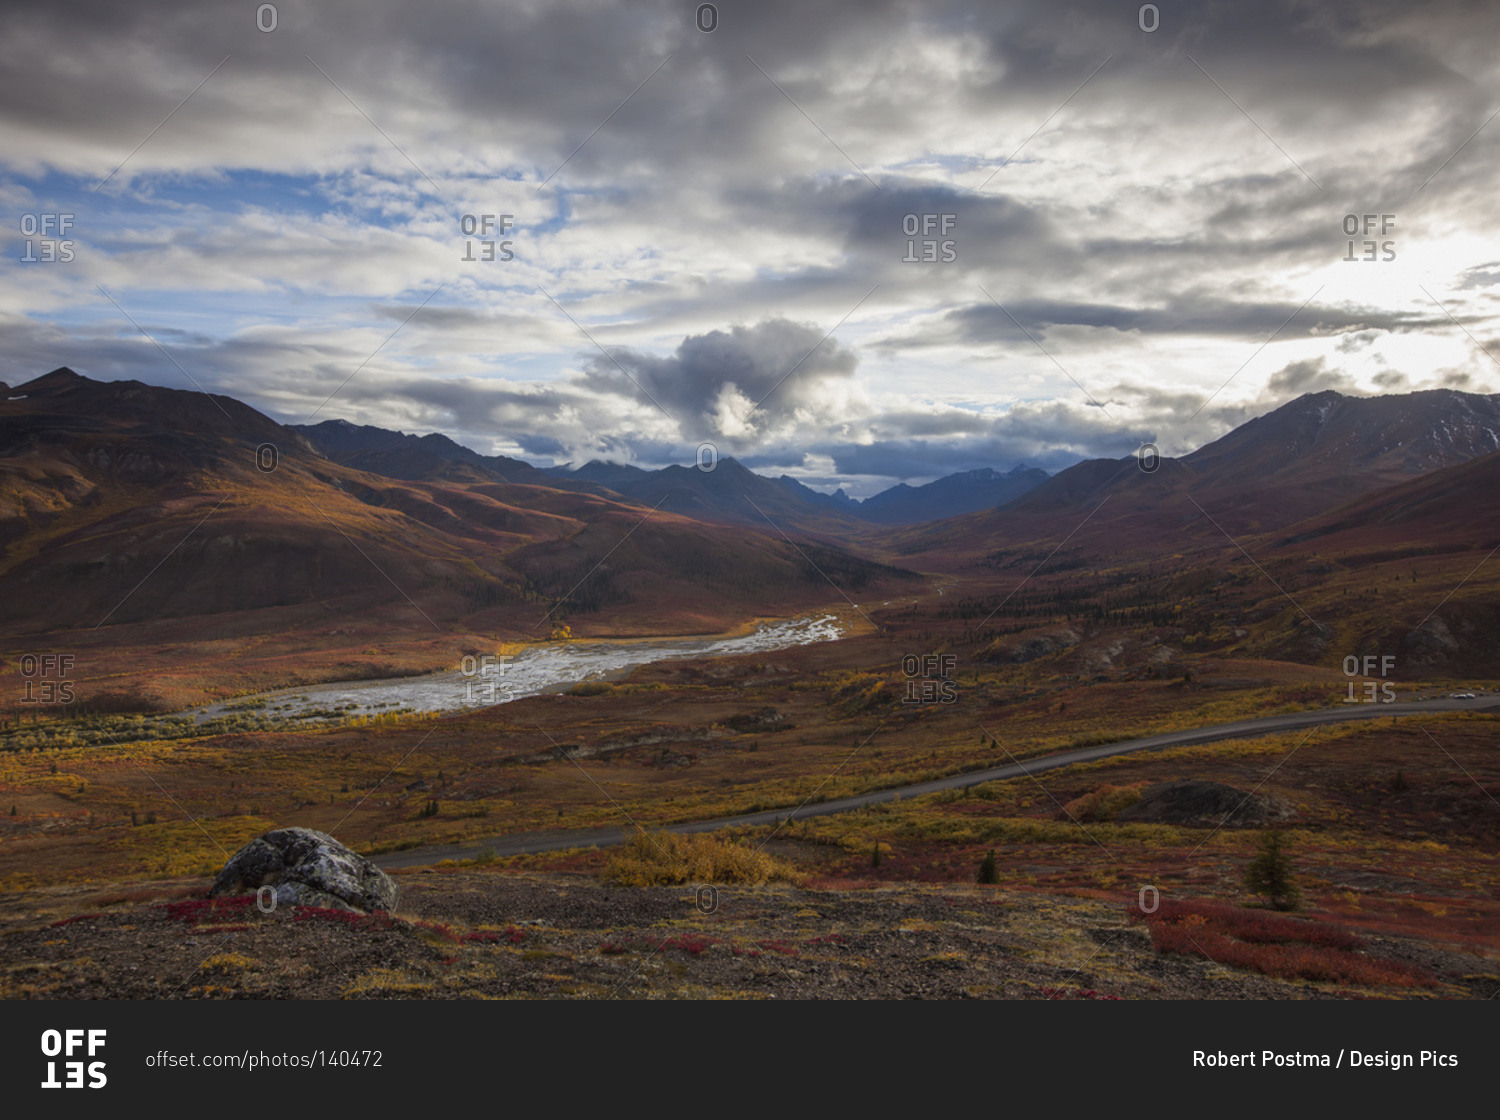 The Dempster highway and klondike valley with the tundra covered in autumn colors